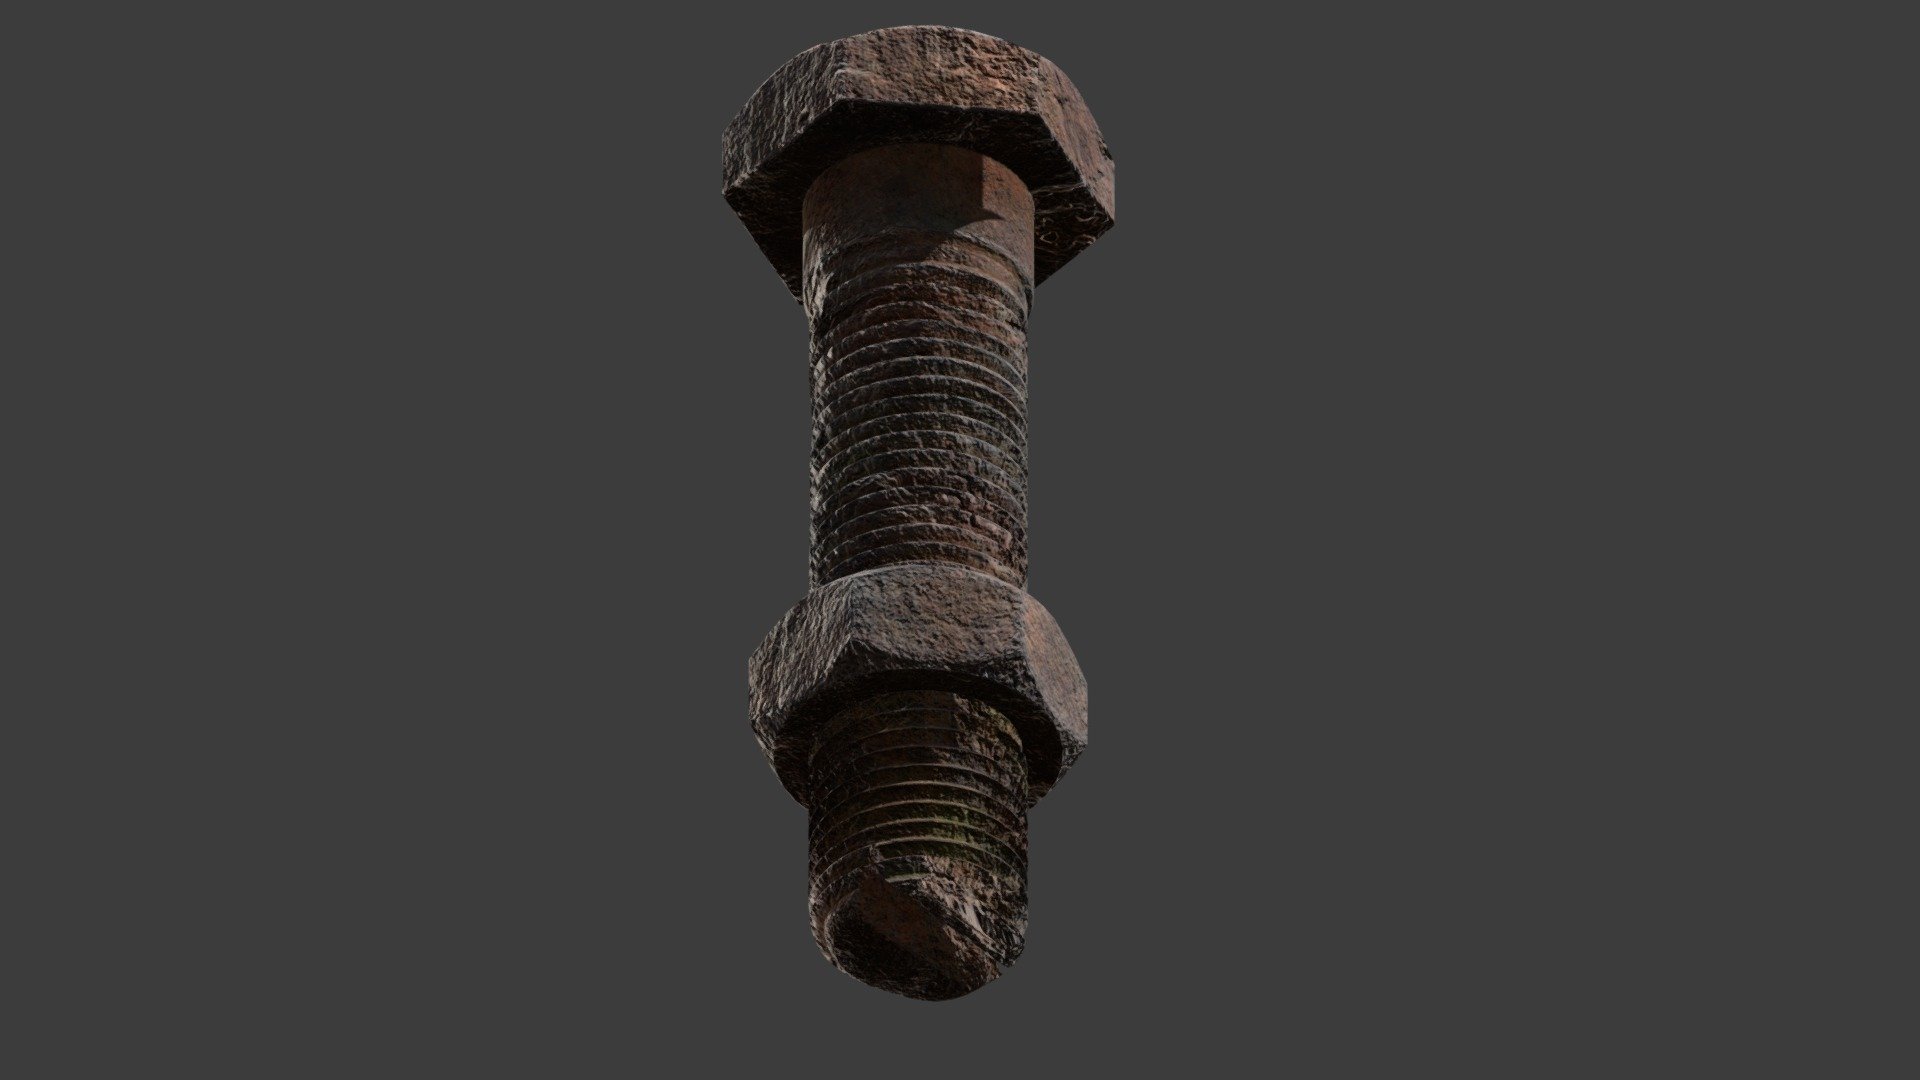 A simple rusty nut bolt made using blender and substance as a texturing practice 3d model